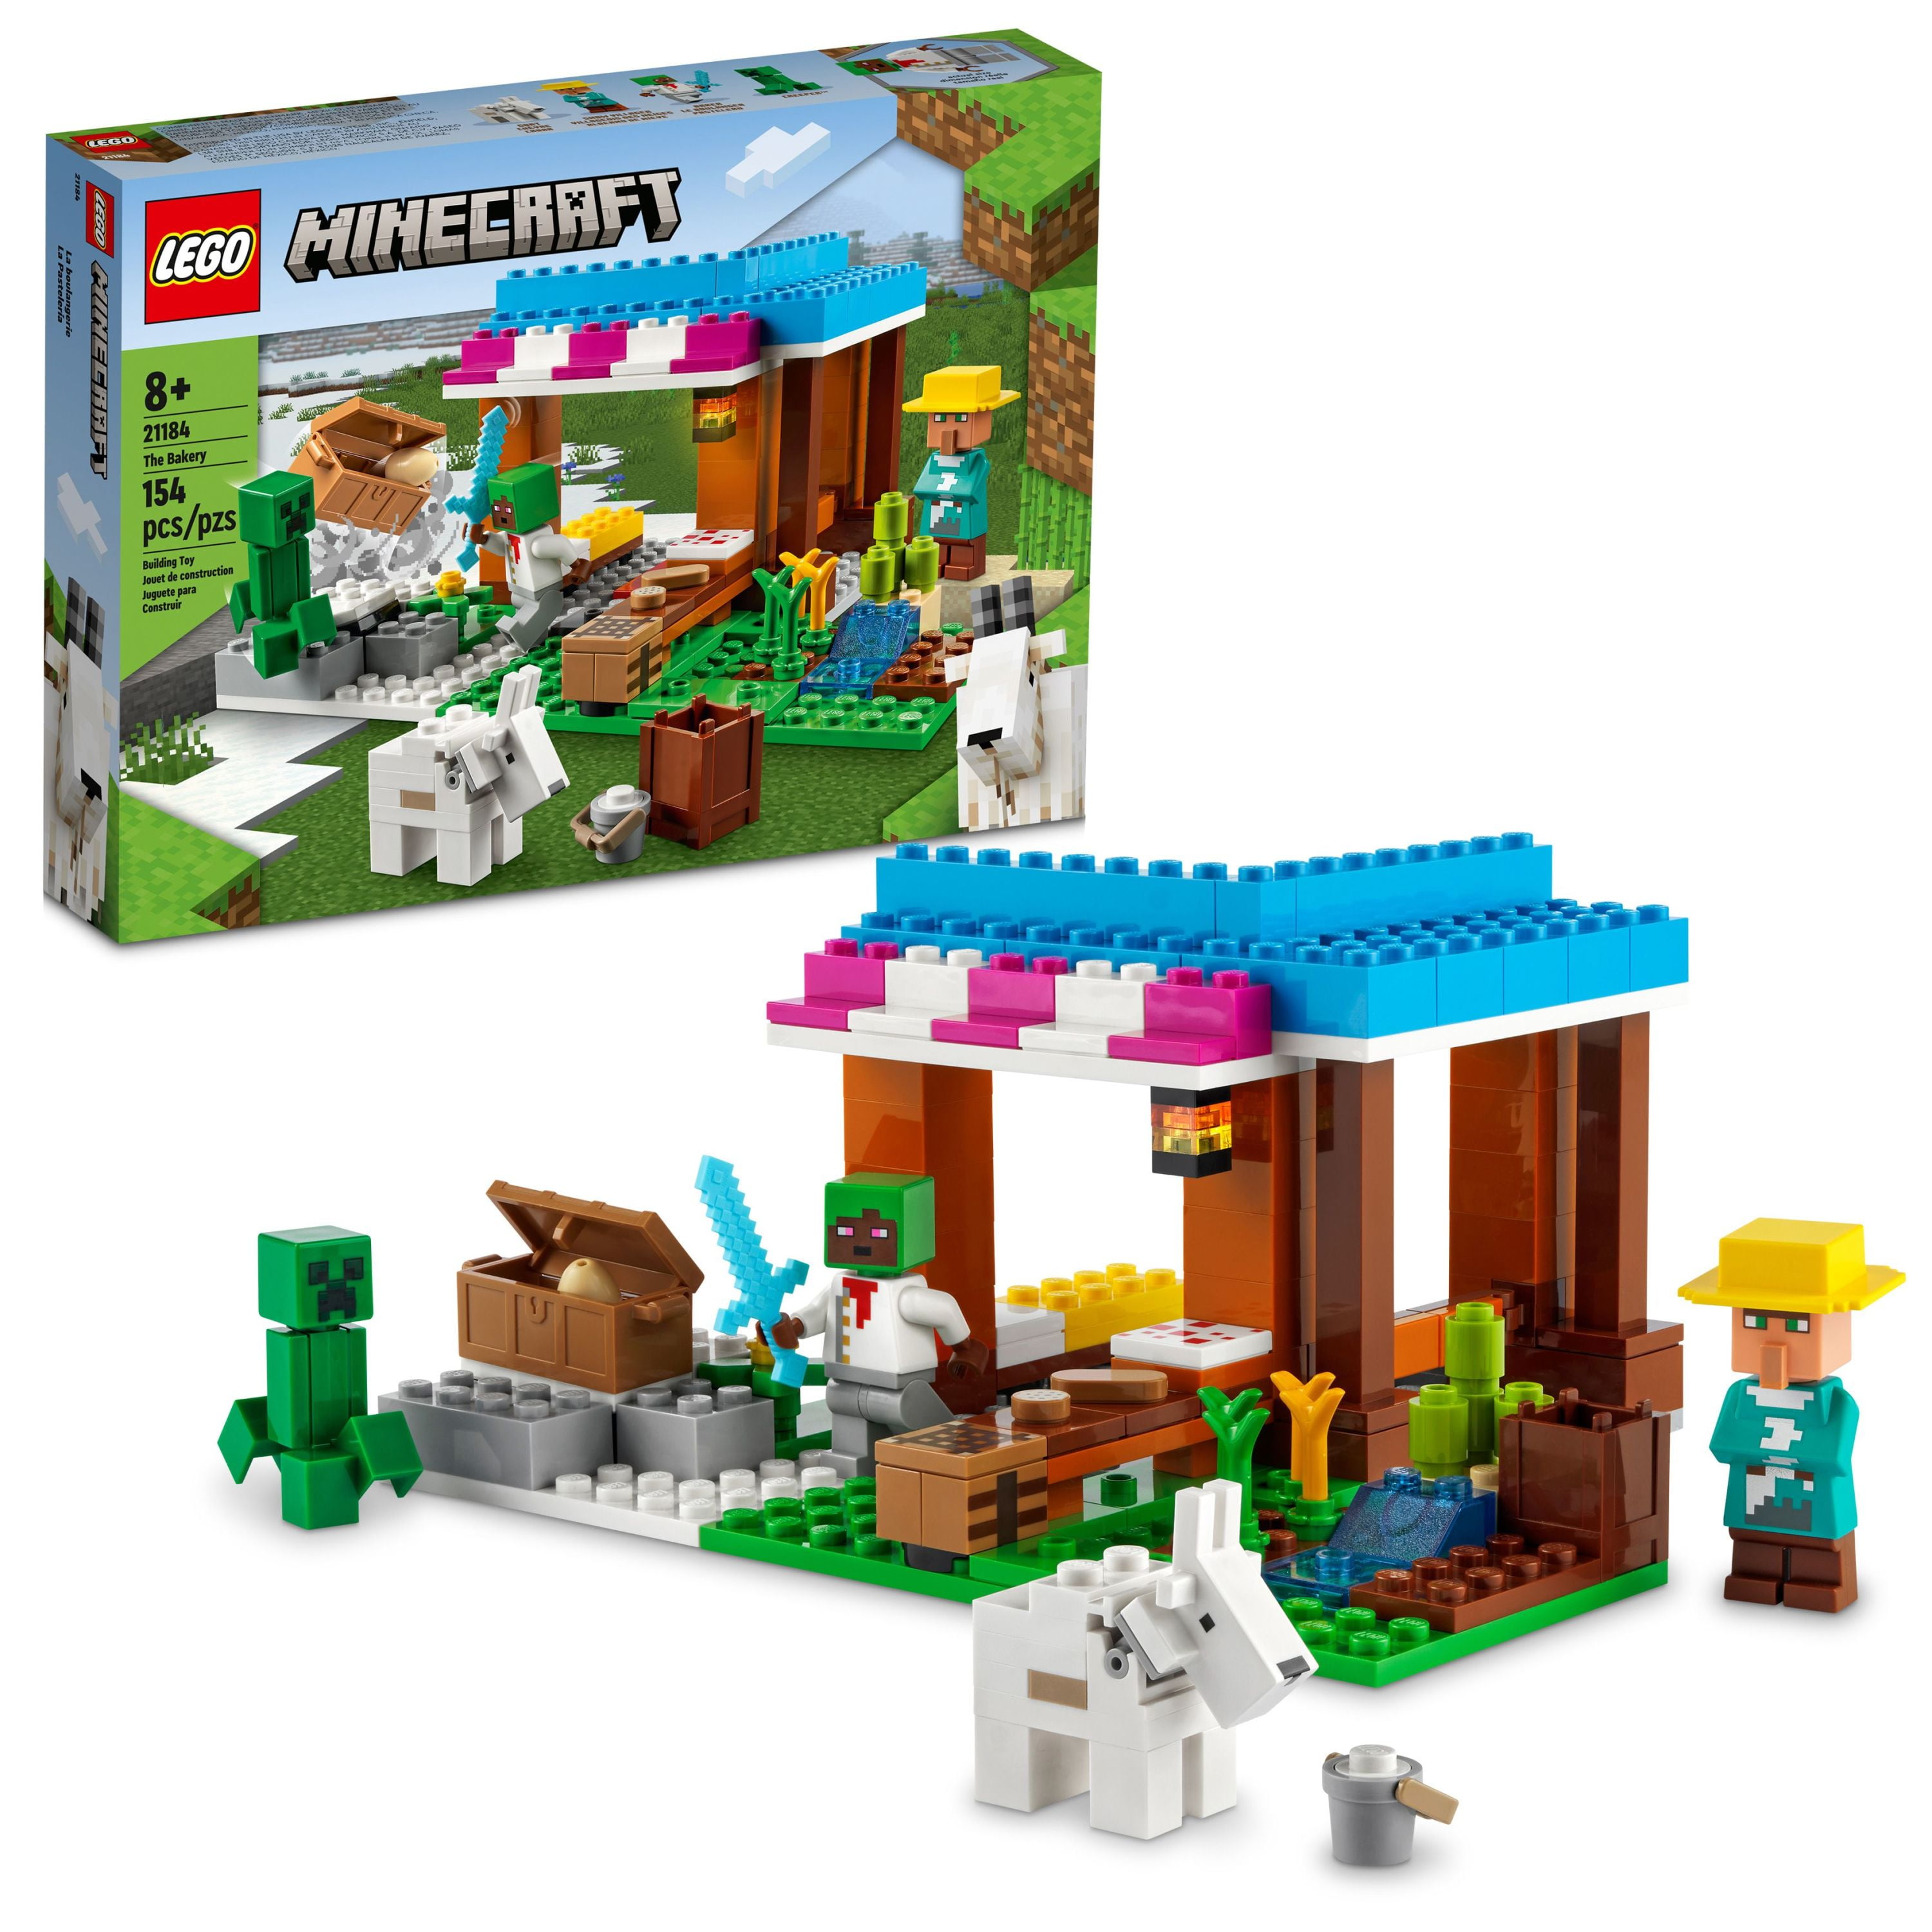 LEGO Minecraft The Bakery Modular Farm Village Building Set, 21184 Gift for Kids, Boys & Girls Ages 8 Plus with Diamond Toy Sword, Creeper & Goat Animal Figures